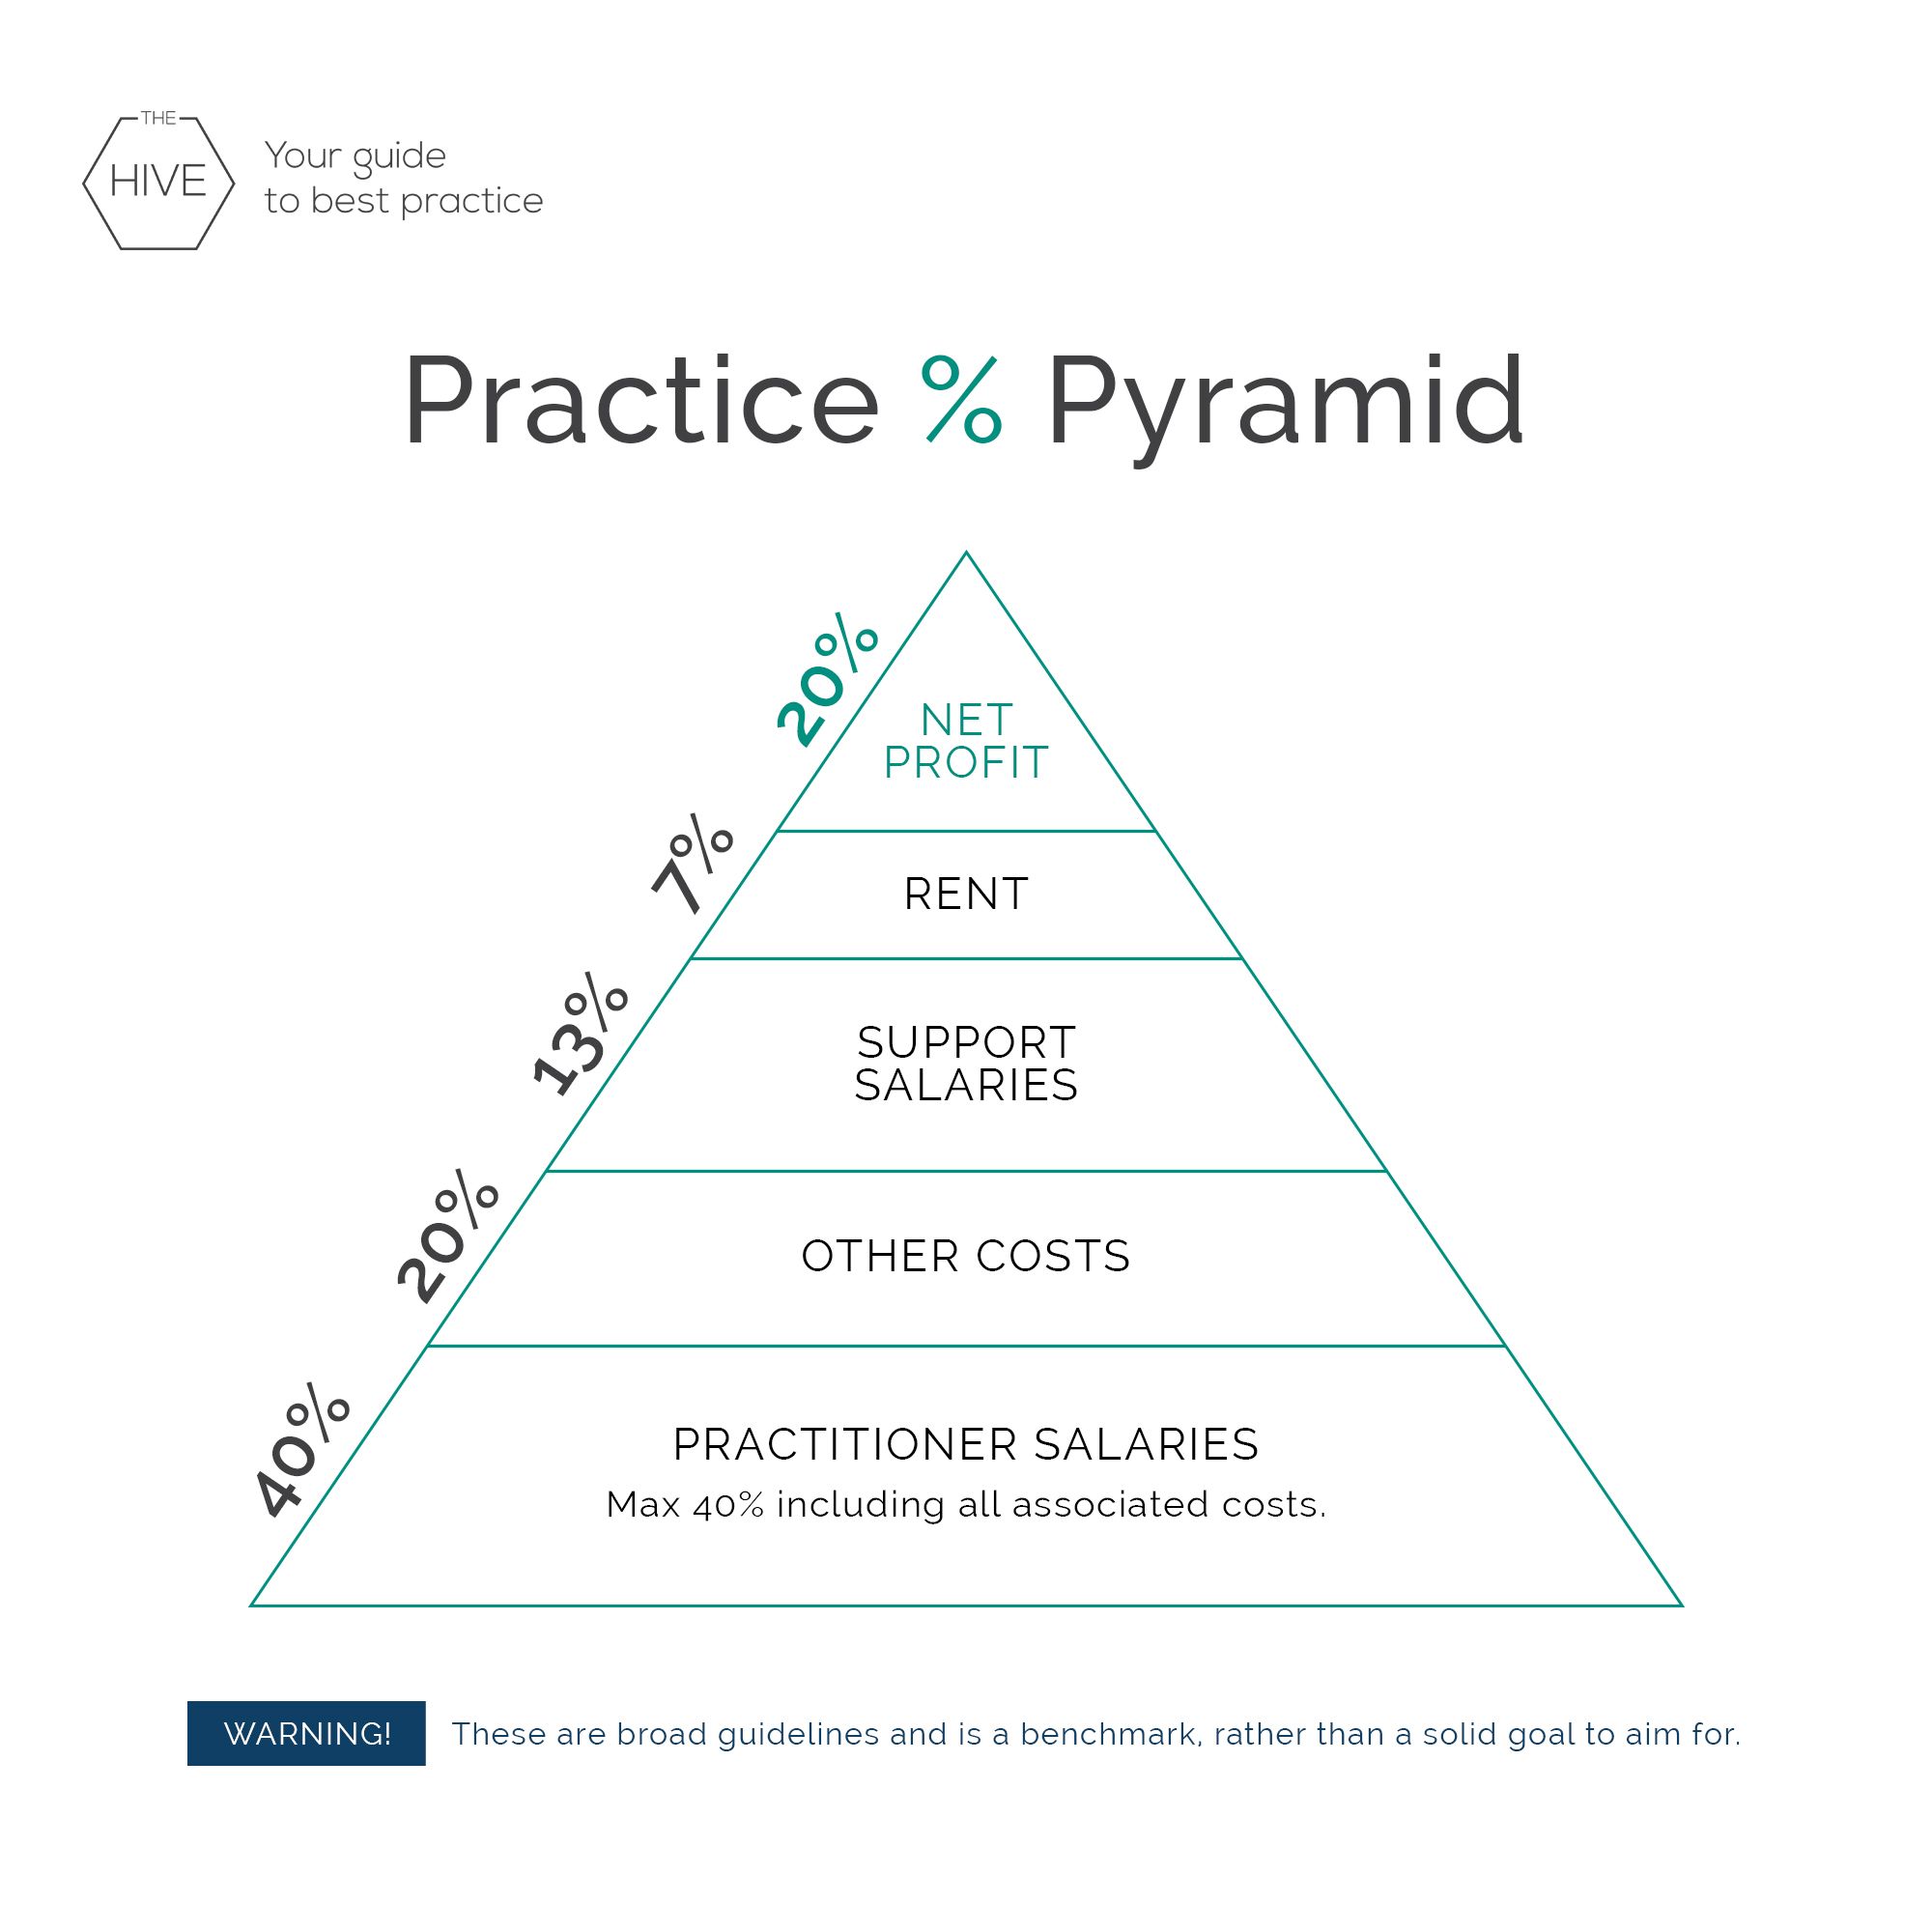 The Practice % Pyramid by The Hive